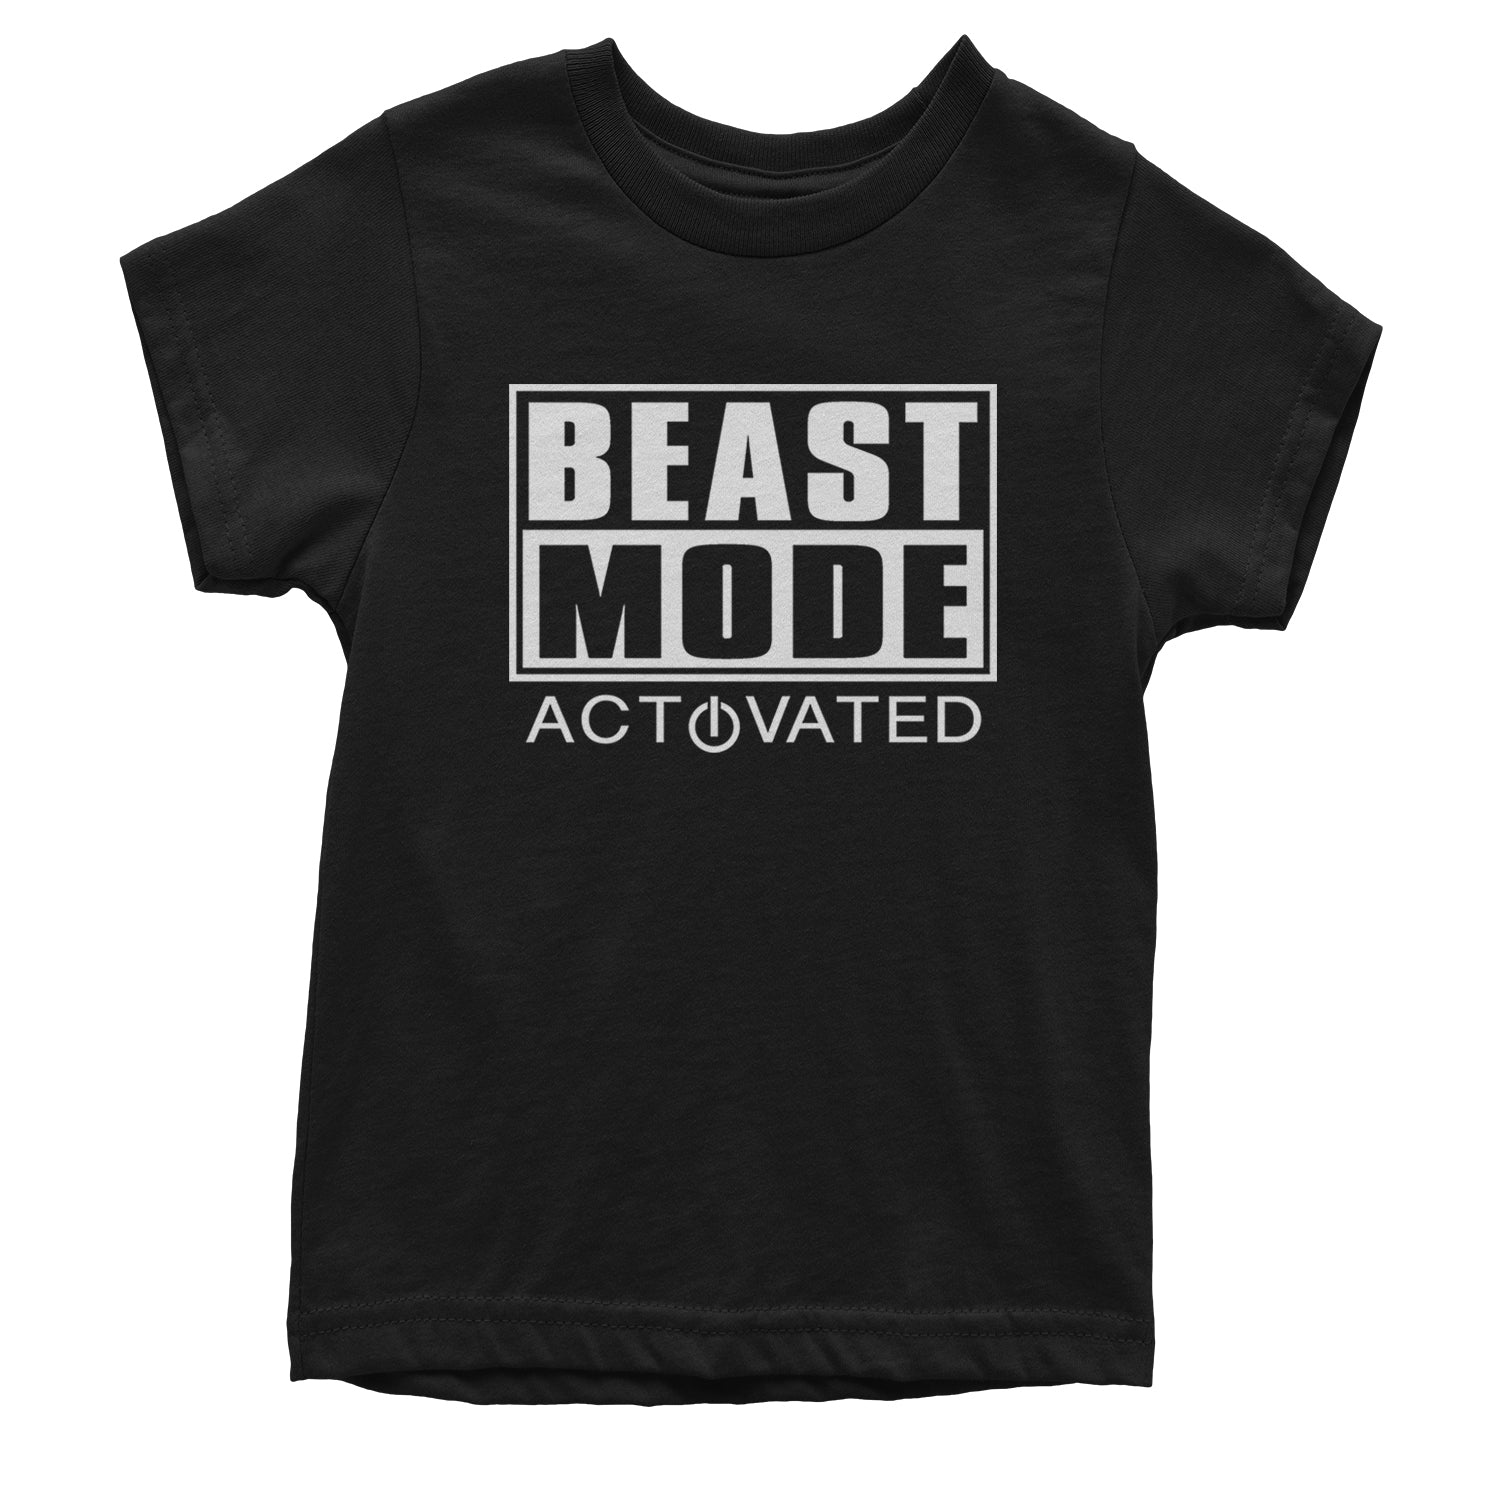 Activated Beast Mode Workout Gym Clothing Youth T-shirt